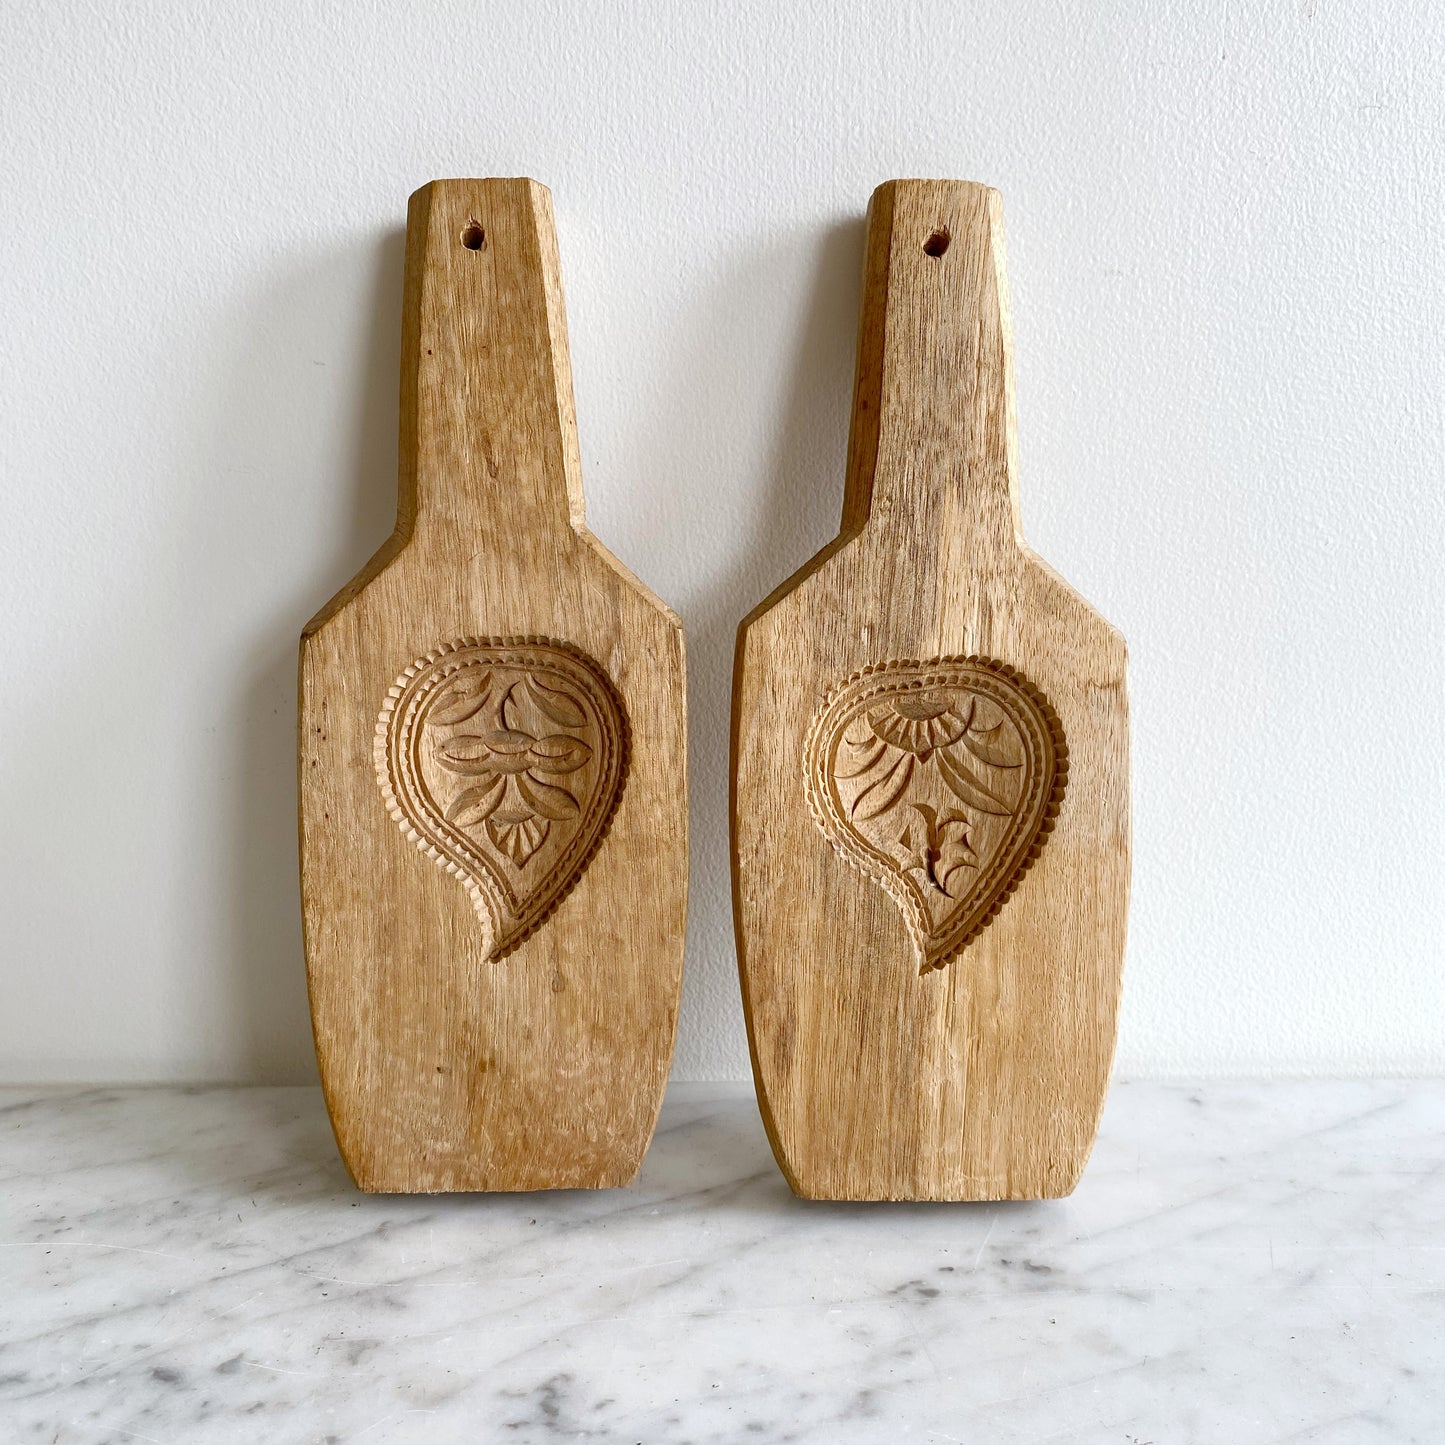 Pair of Carved Wooden Cookie Molds / Presses